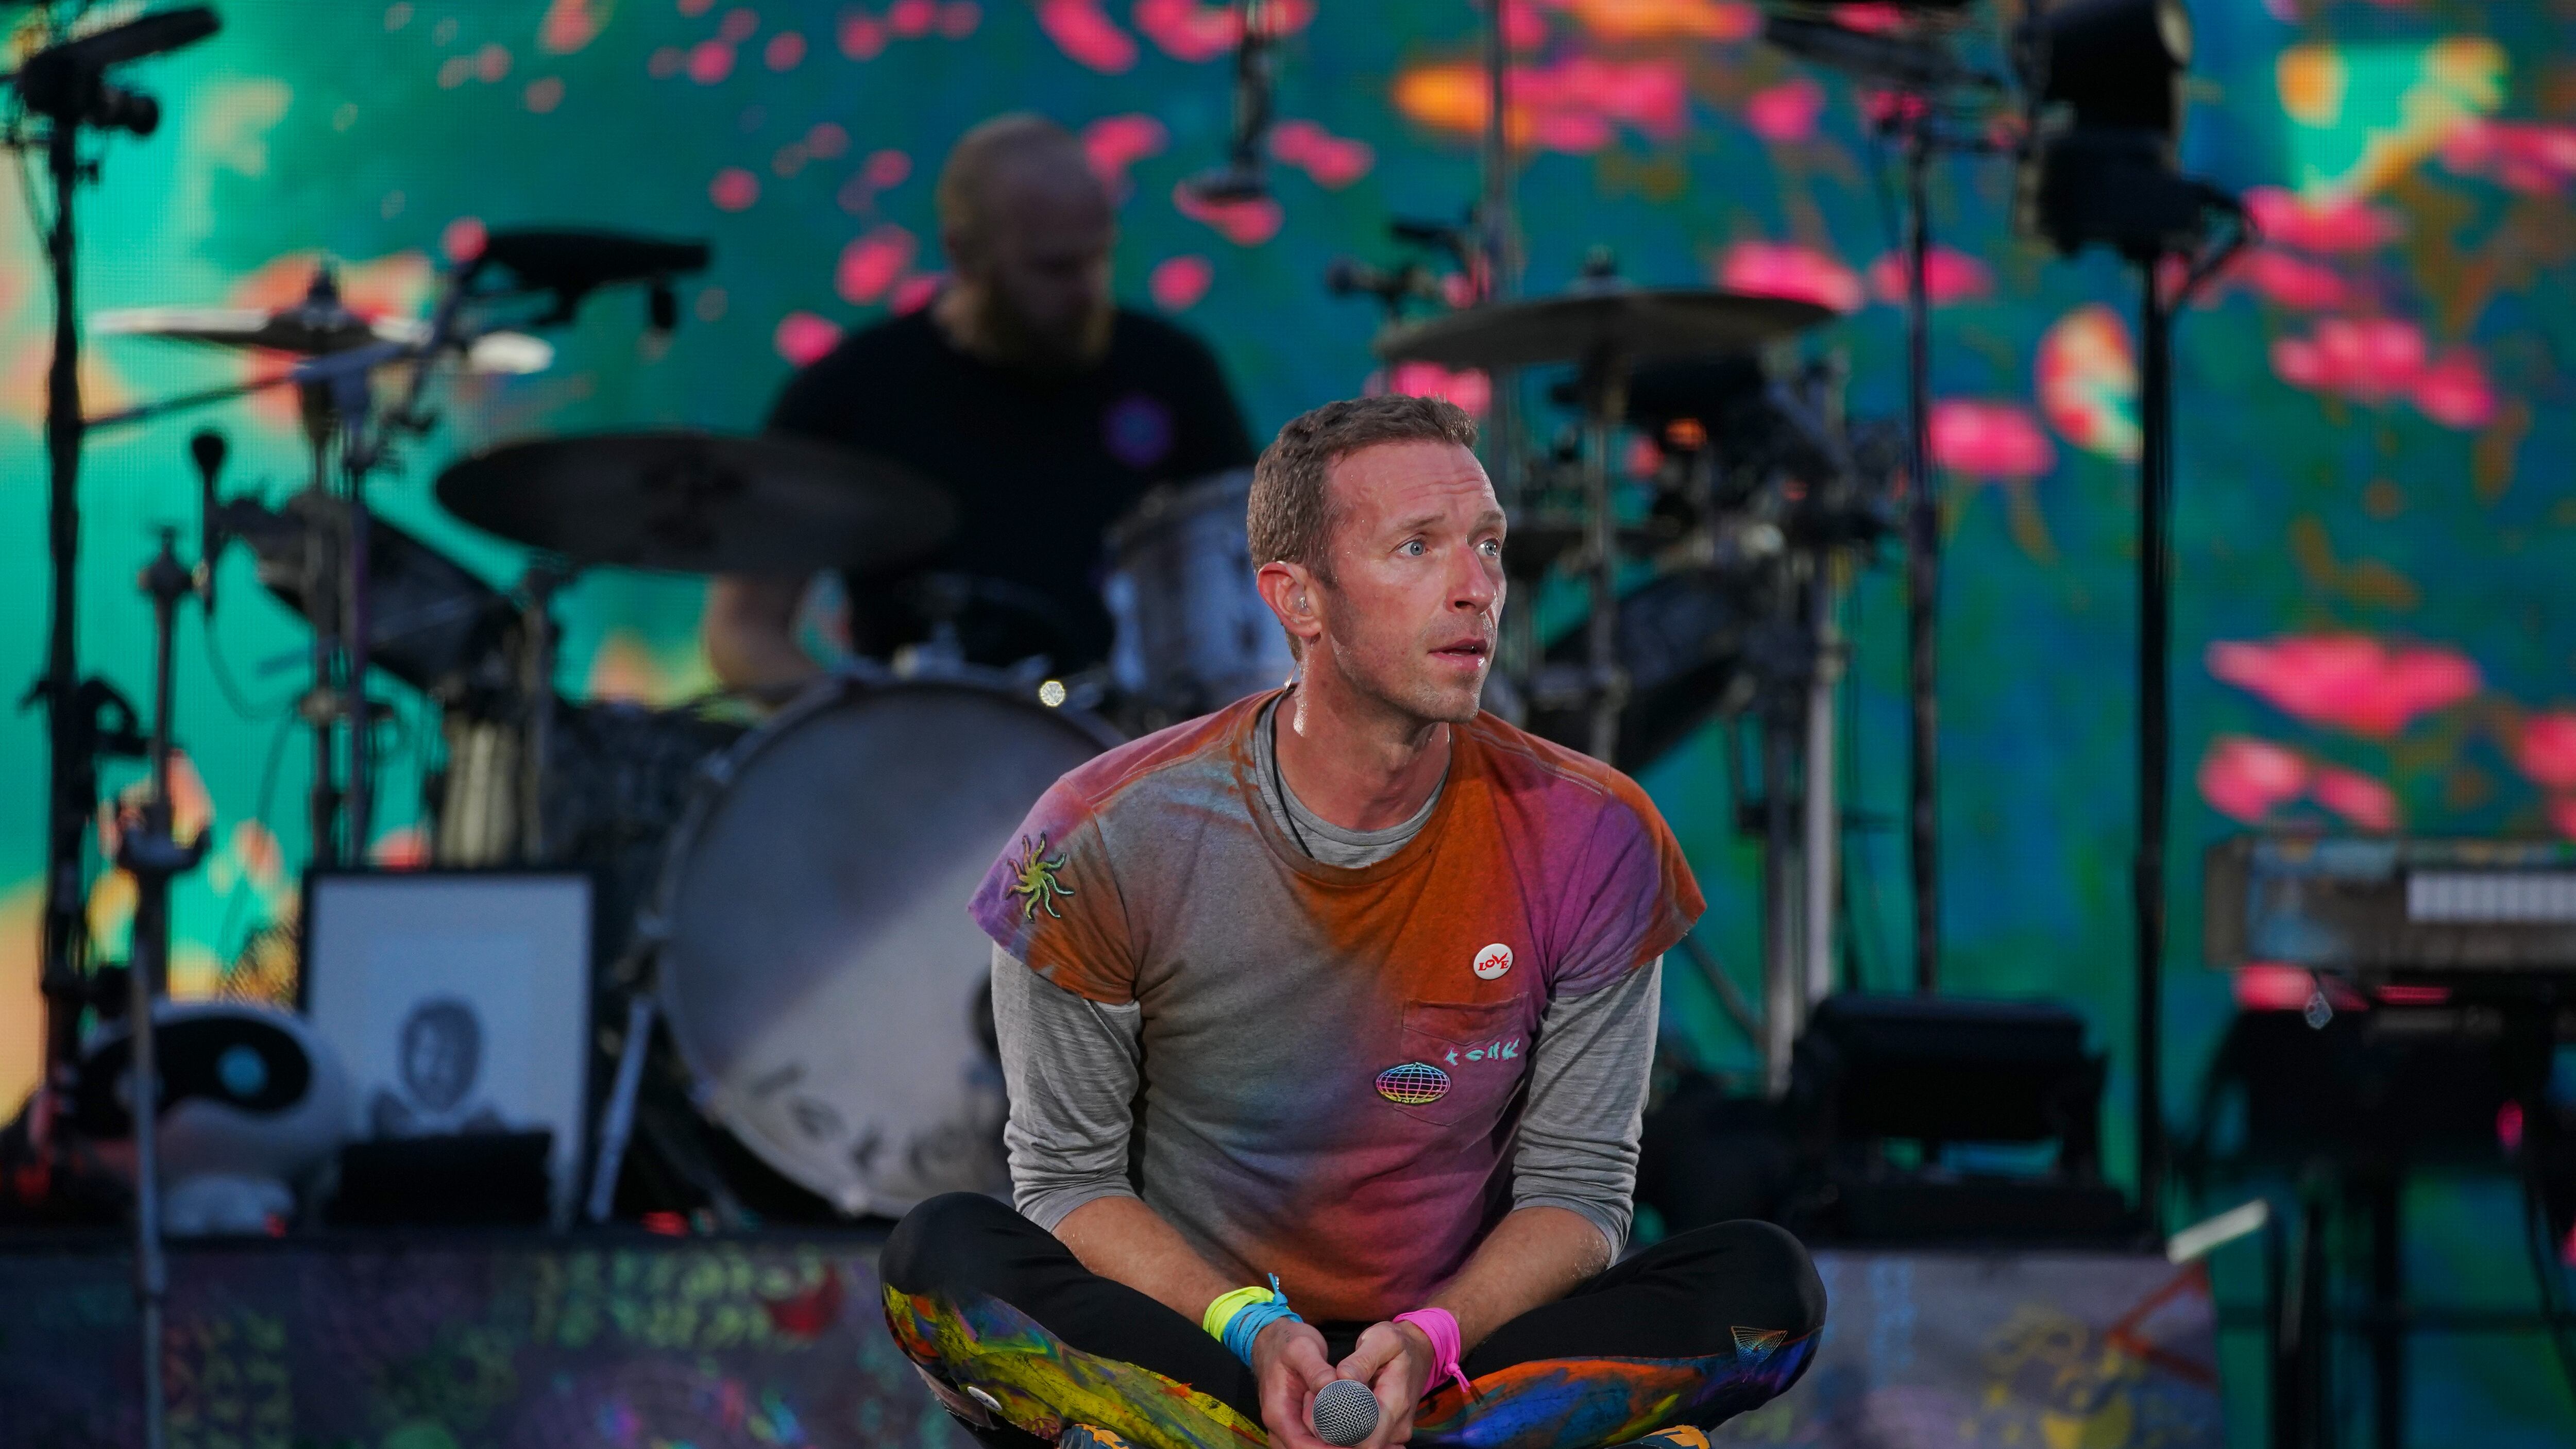 Coldplay in concert at the Manchester Ethiad Stadium